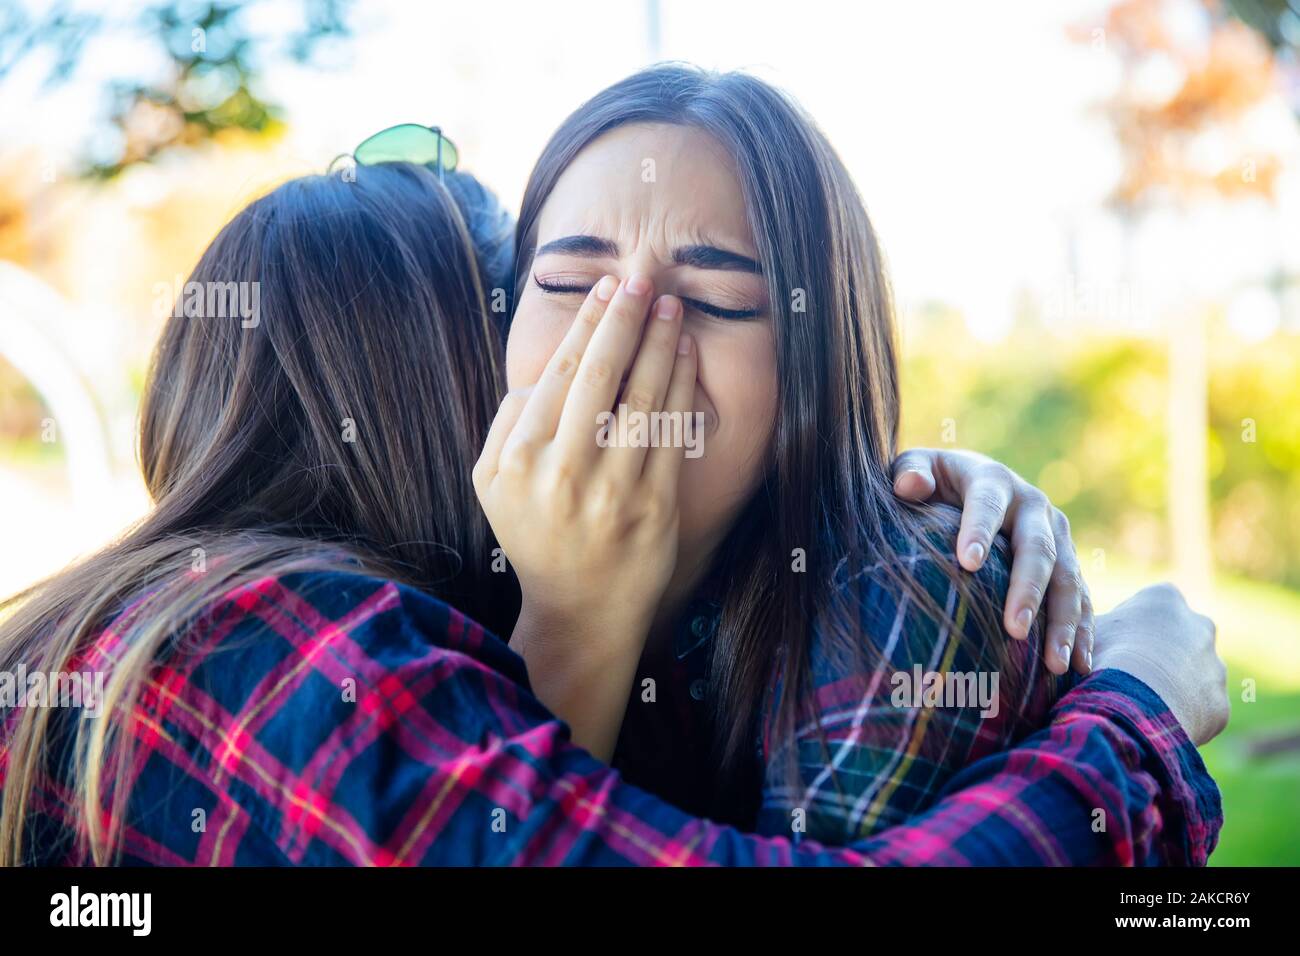 View at two sad best female friends embracing each other Stock Photo